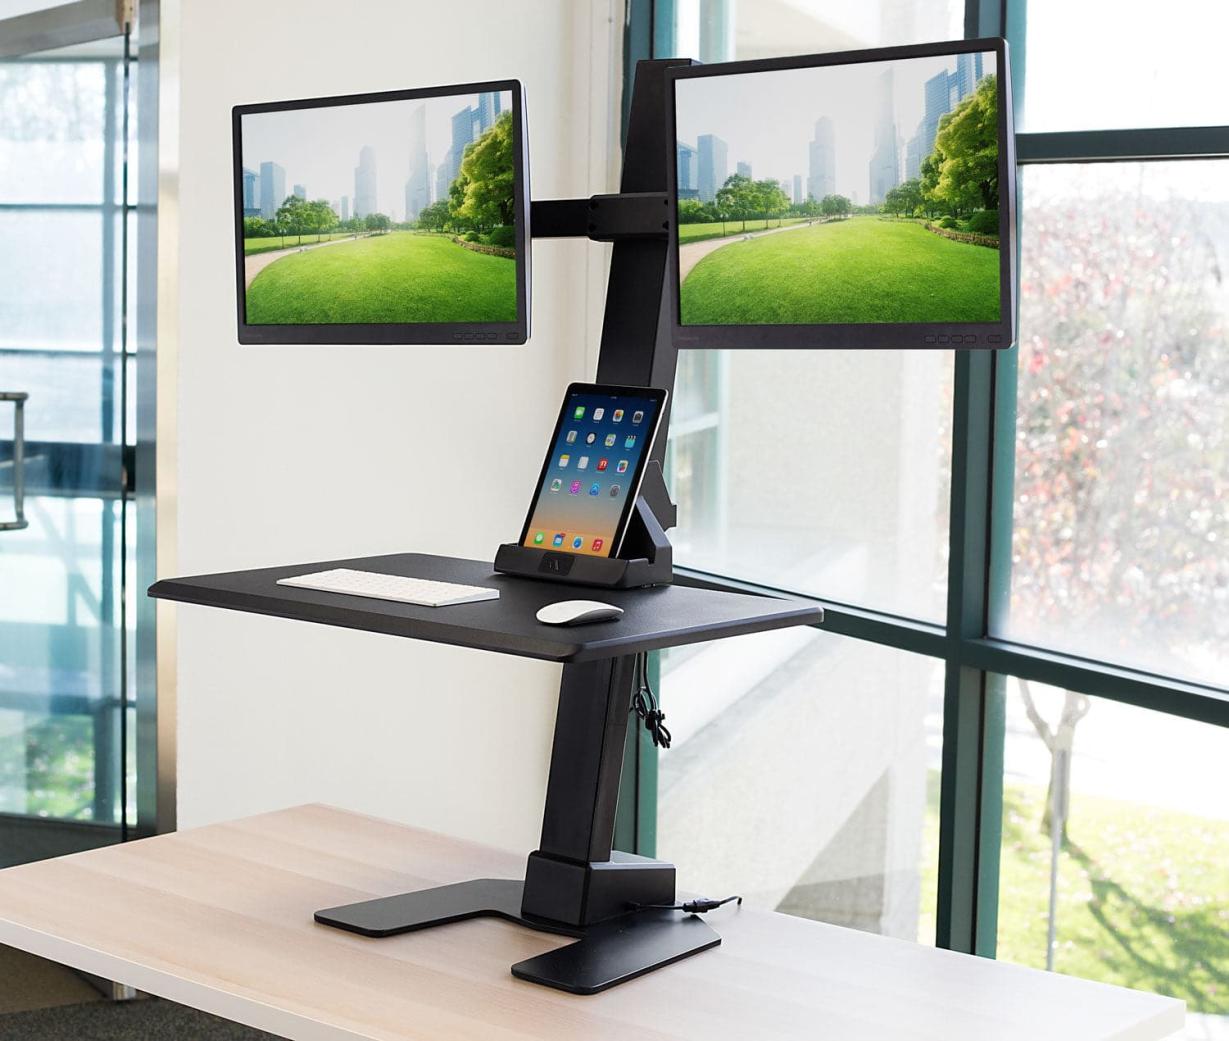 How to Transition to a Standing Desk or Standing Desk Converter Without Discomfort?